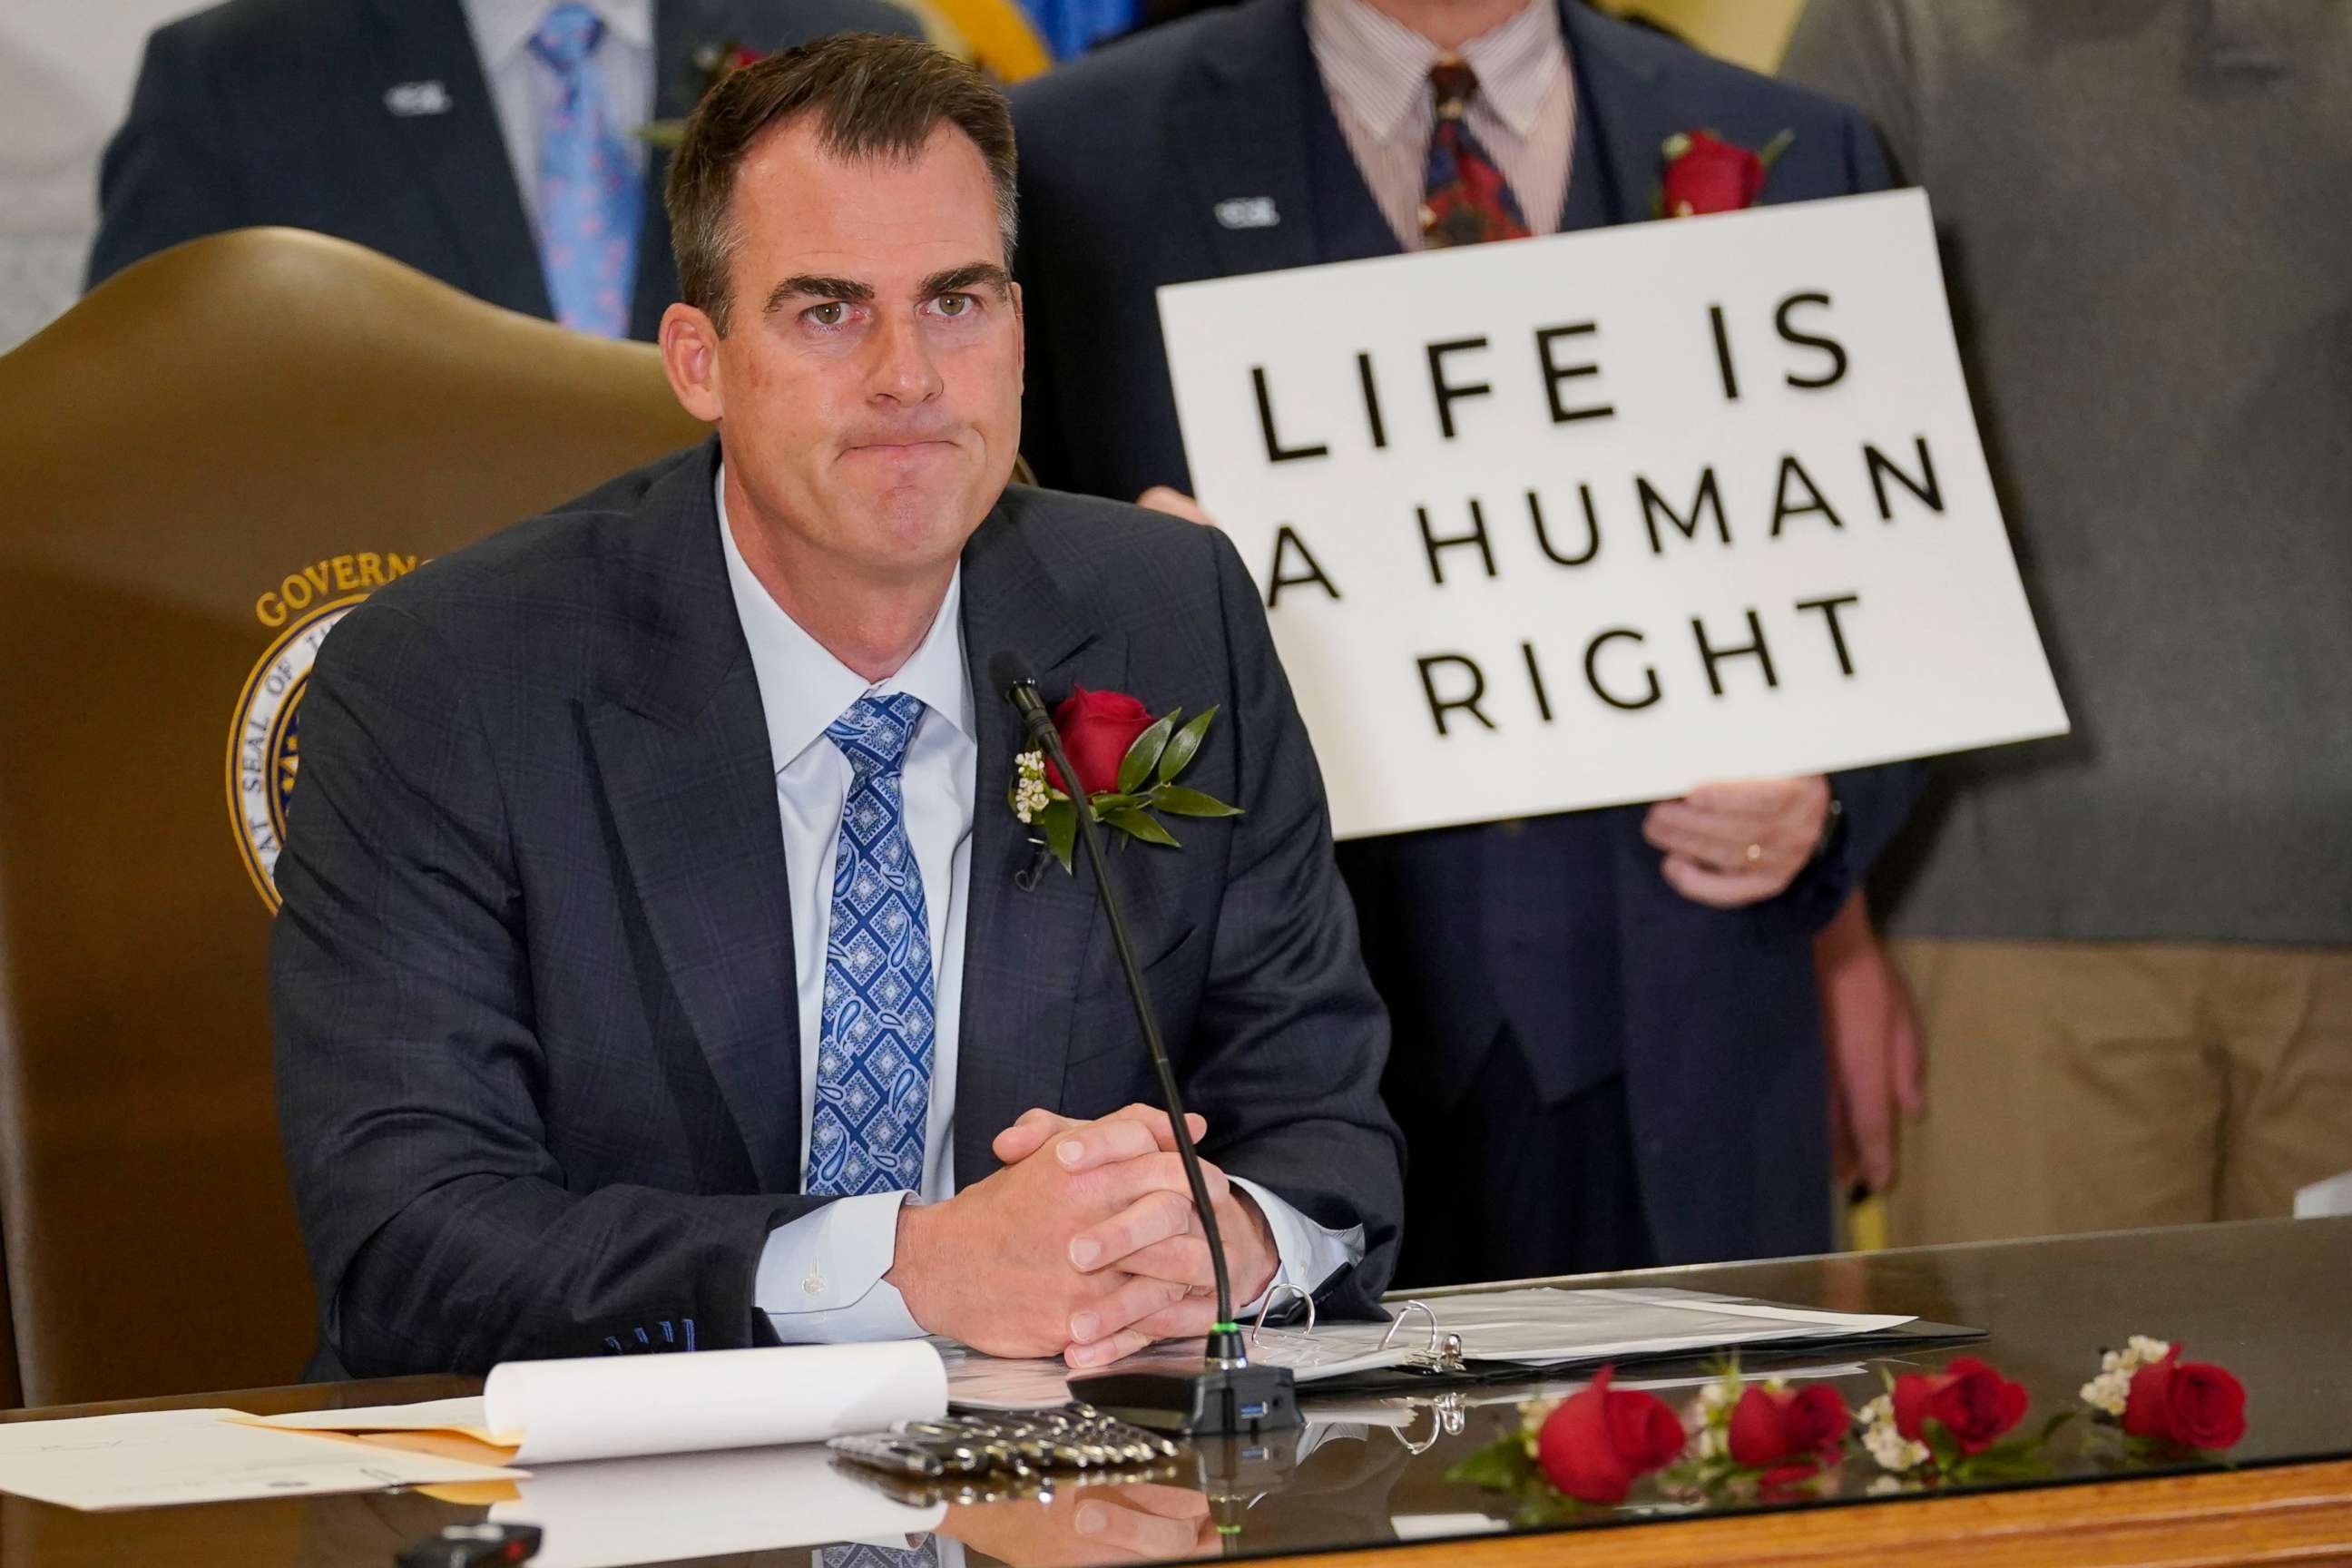 PHOTO: Oklahoma Gov. Kevin Stitt speaks after signing into law a bill making it a felony to perform an abortion, punishable by up to 10 years in prison, April 12, 2022, in Oklahoma City.